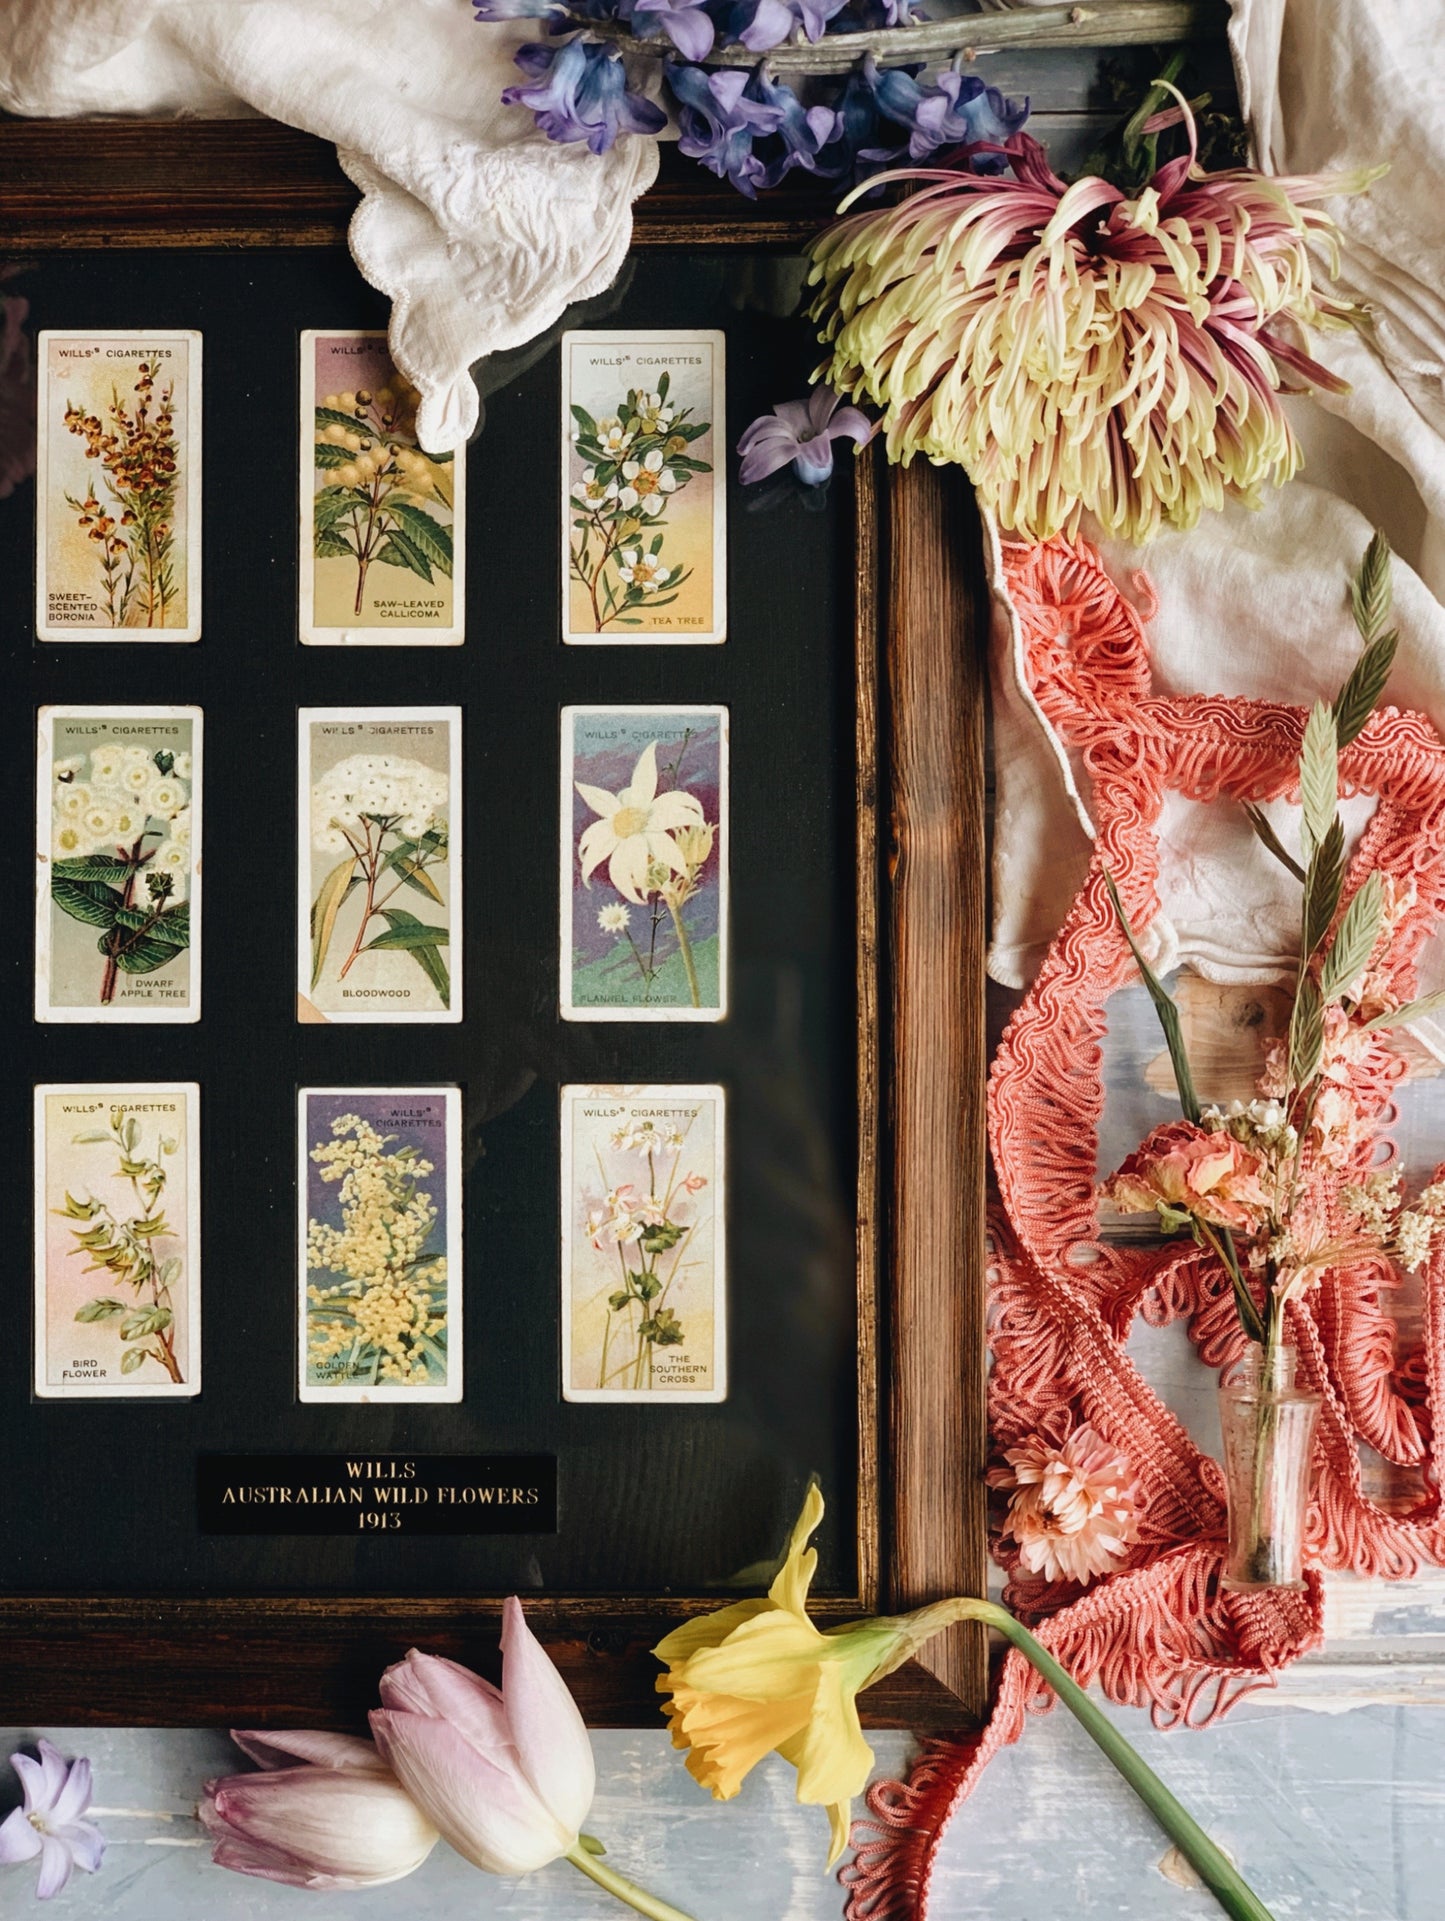 Vintage 1913 Australian Flower Collectible Cards (UK SHIPPING ONLY)